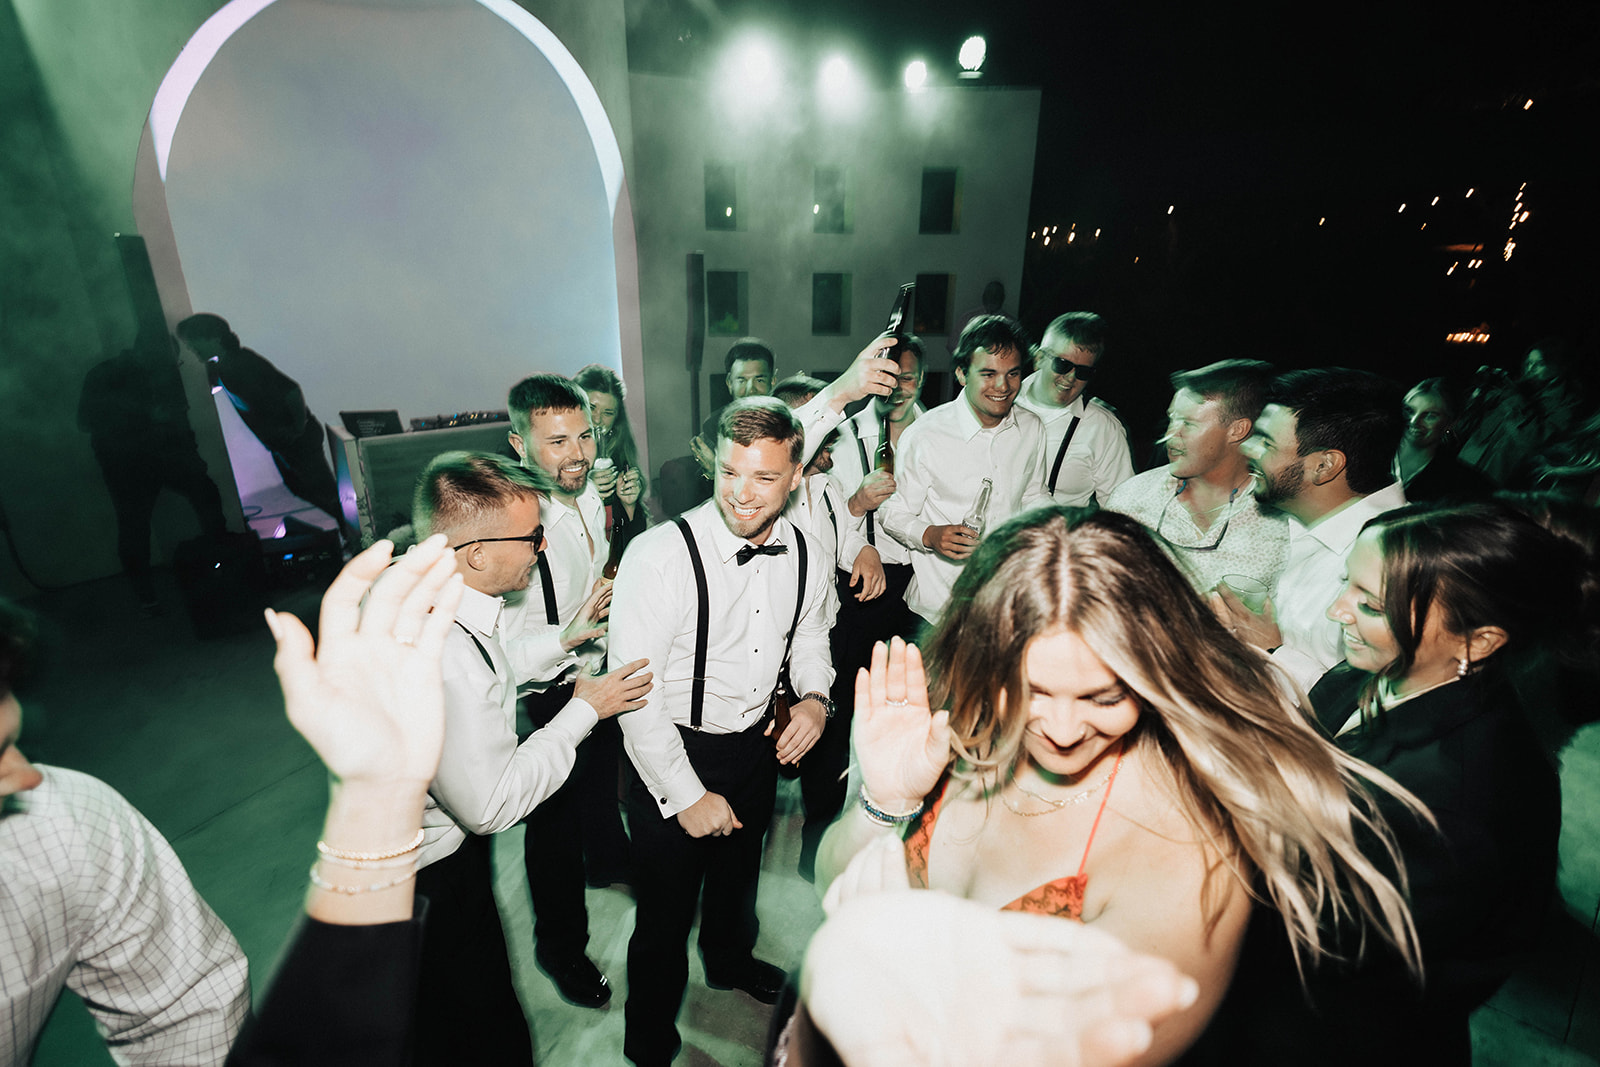 Group of people enjoying a dance party at a wedding